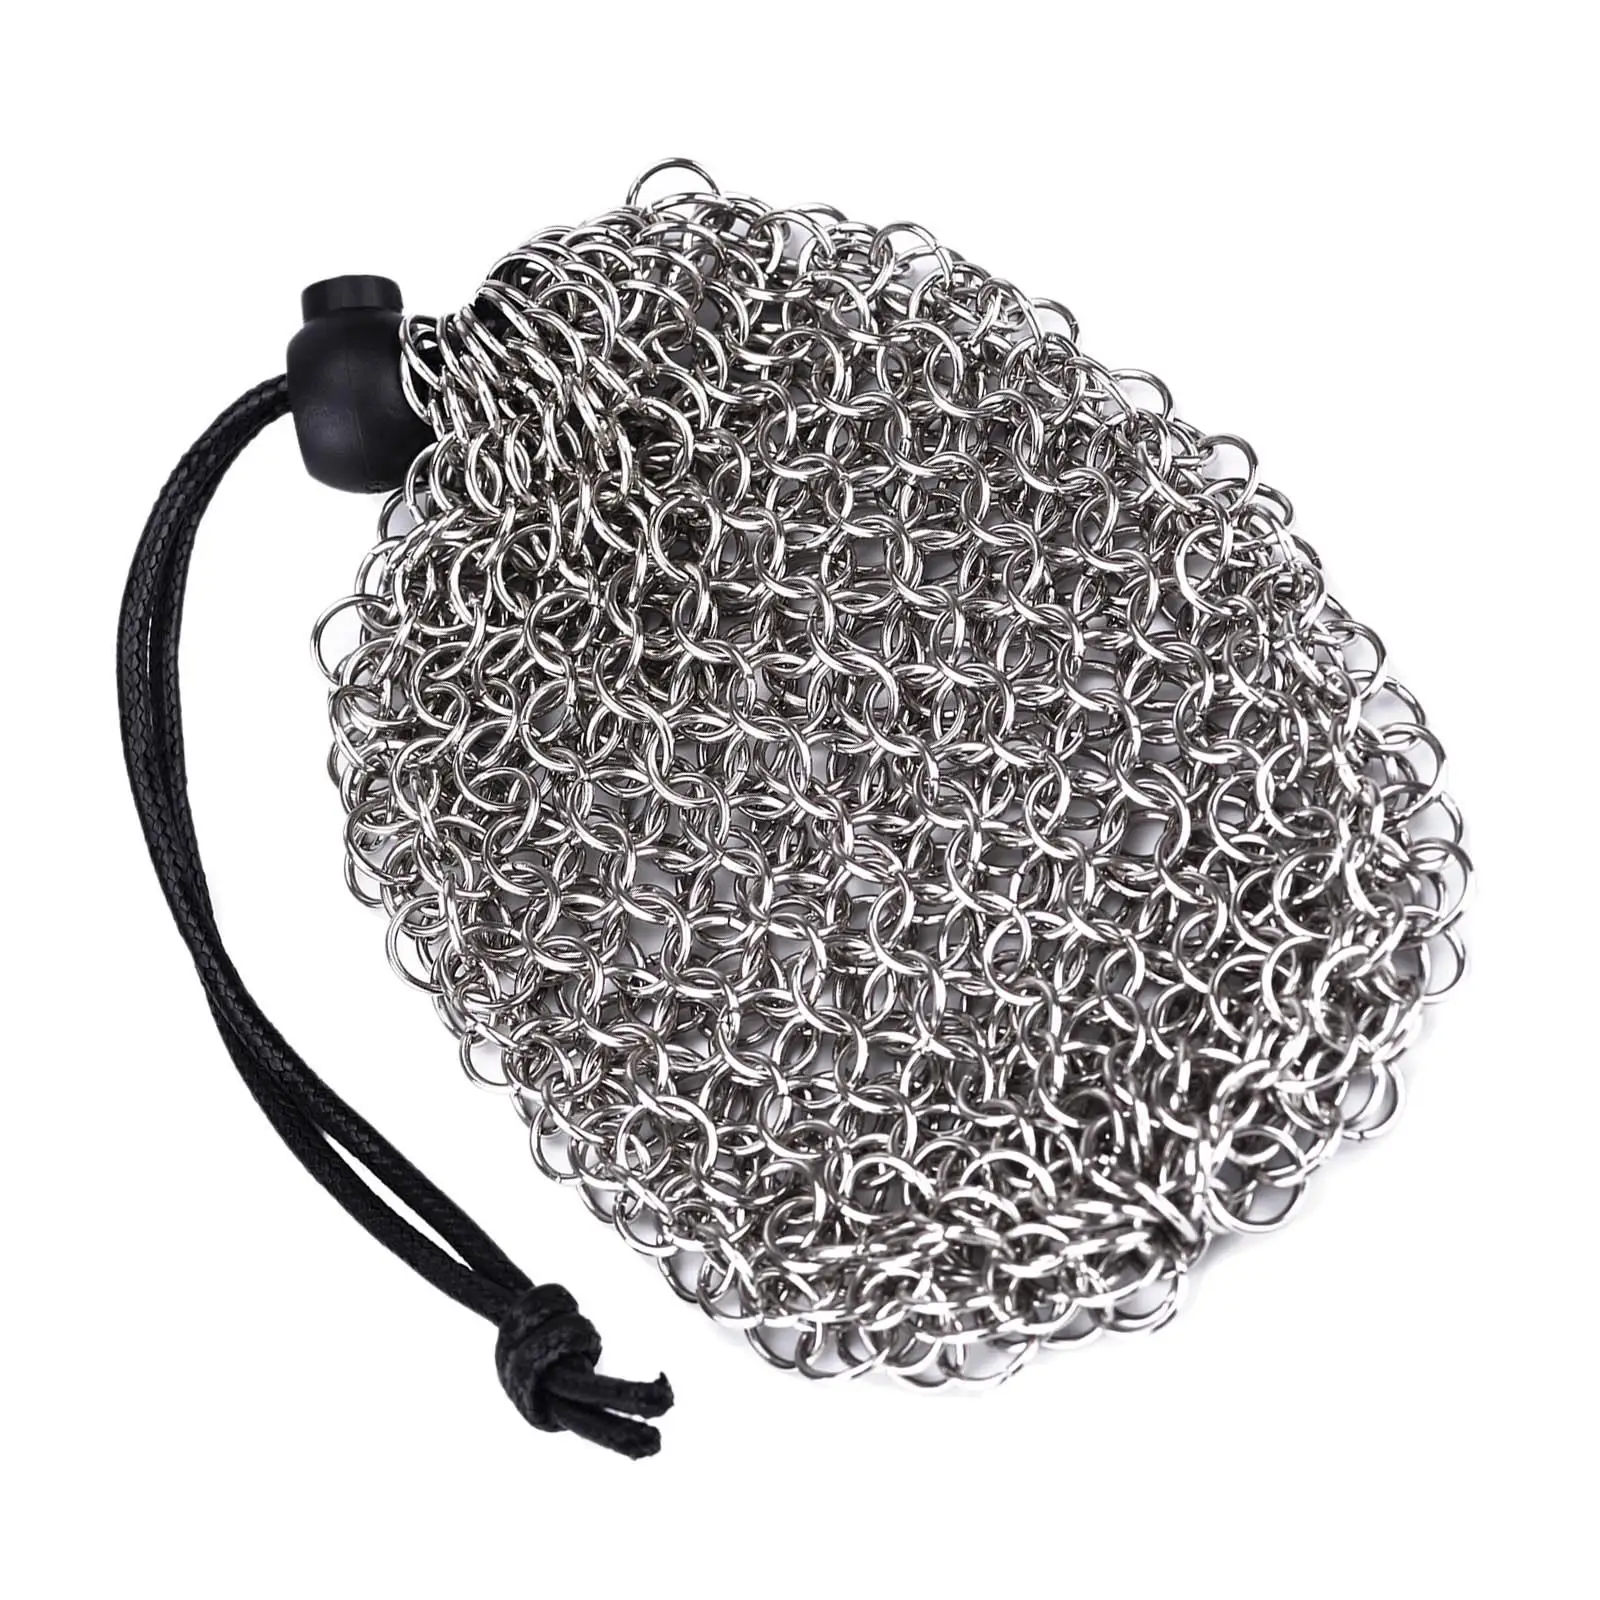 1 Piece Chainmail Dice Bag Stainless Steel Durable DND Dice Pouch for Coins